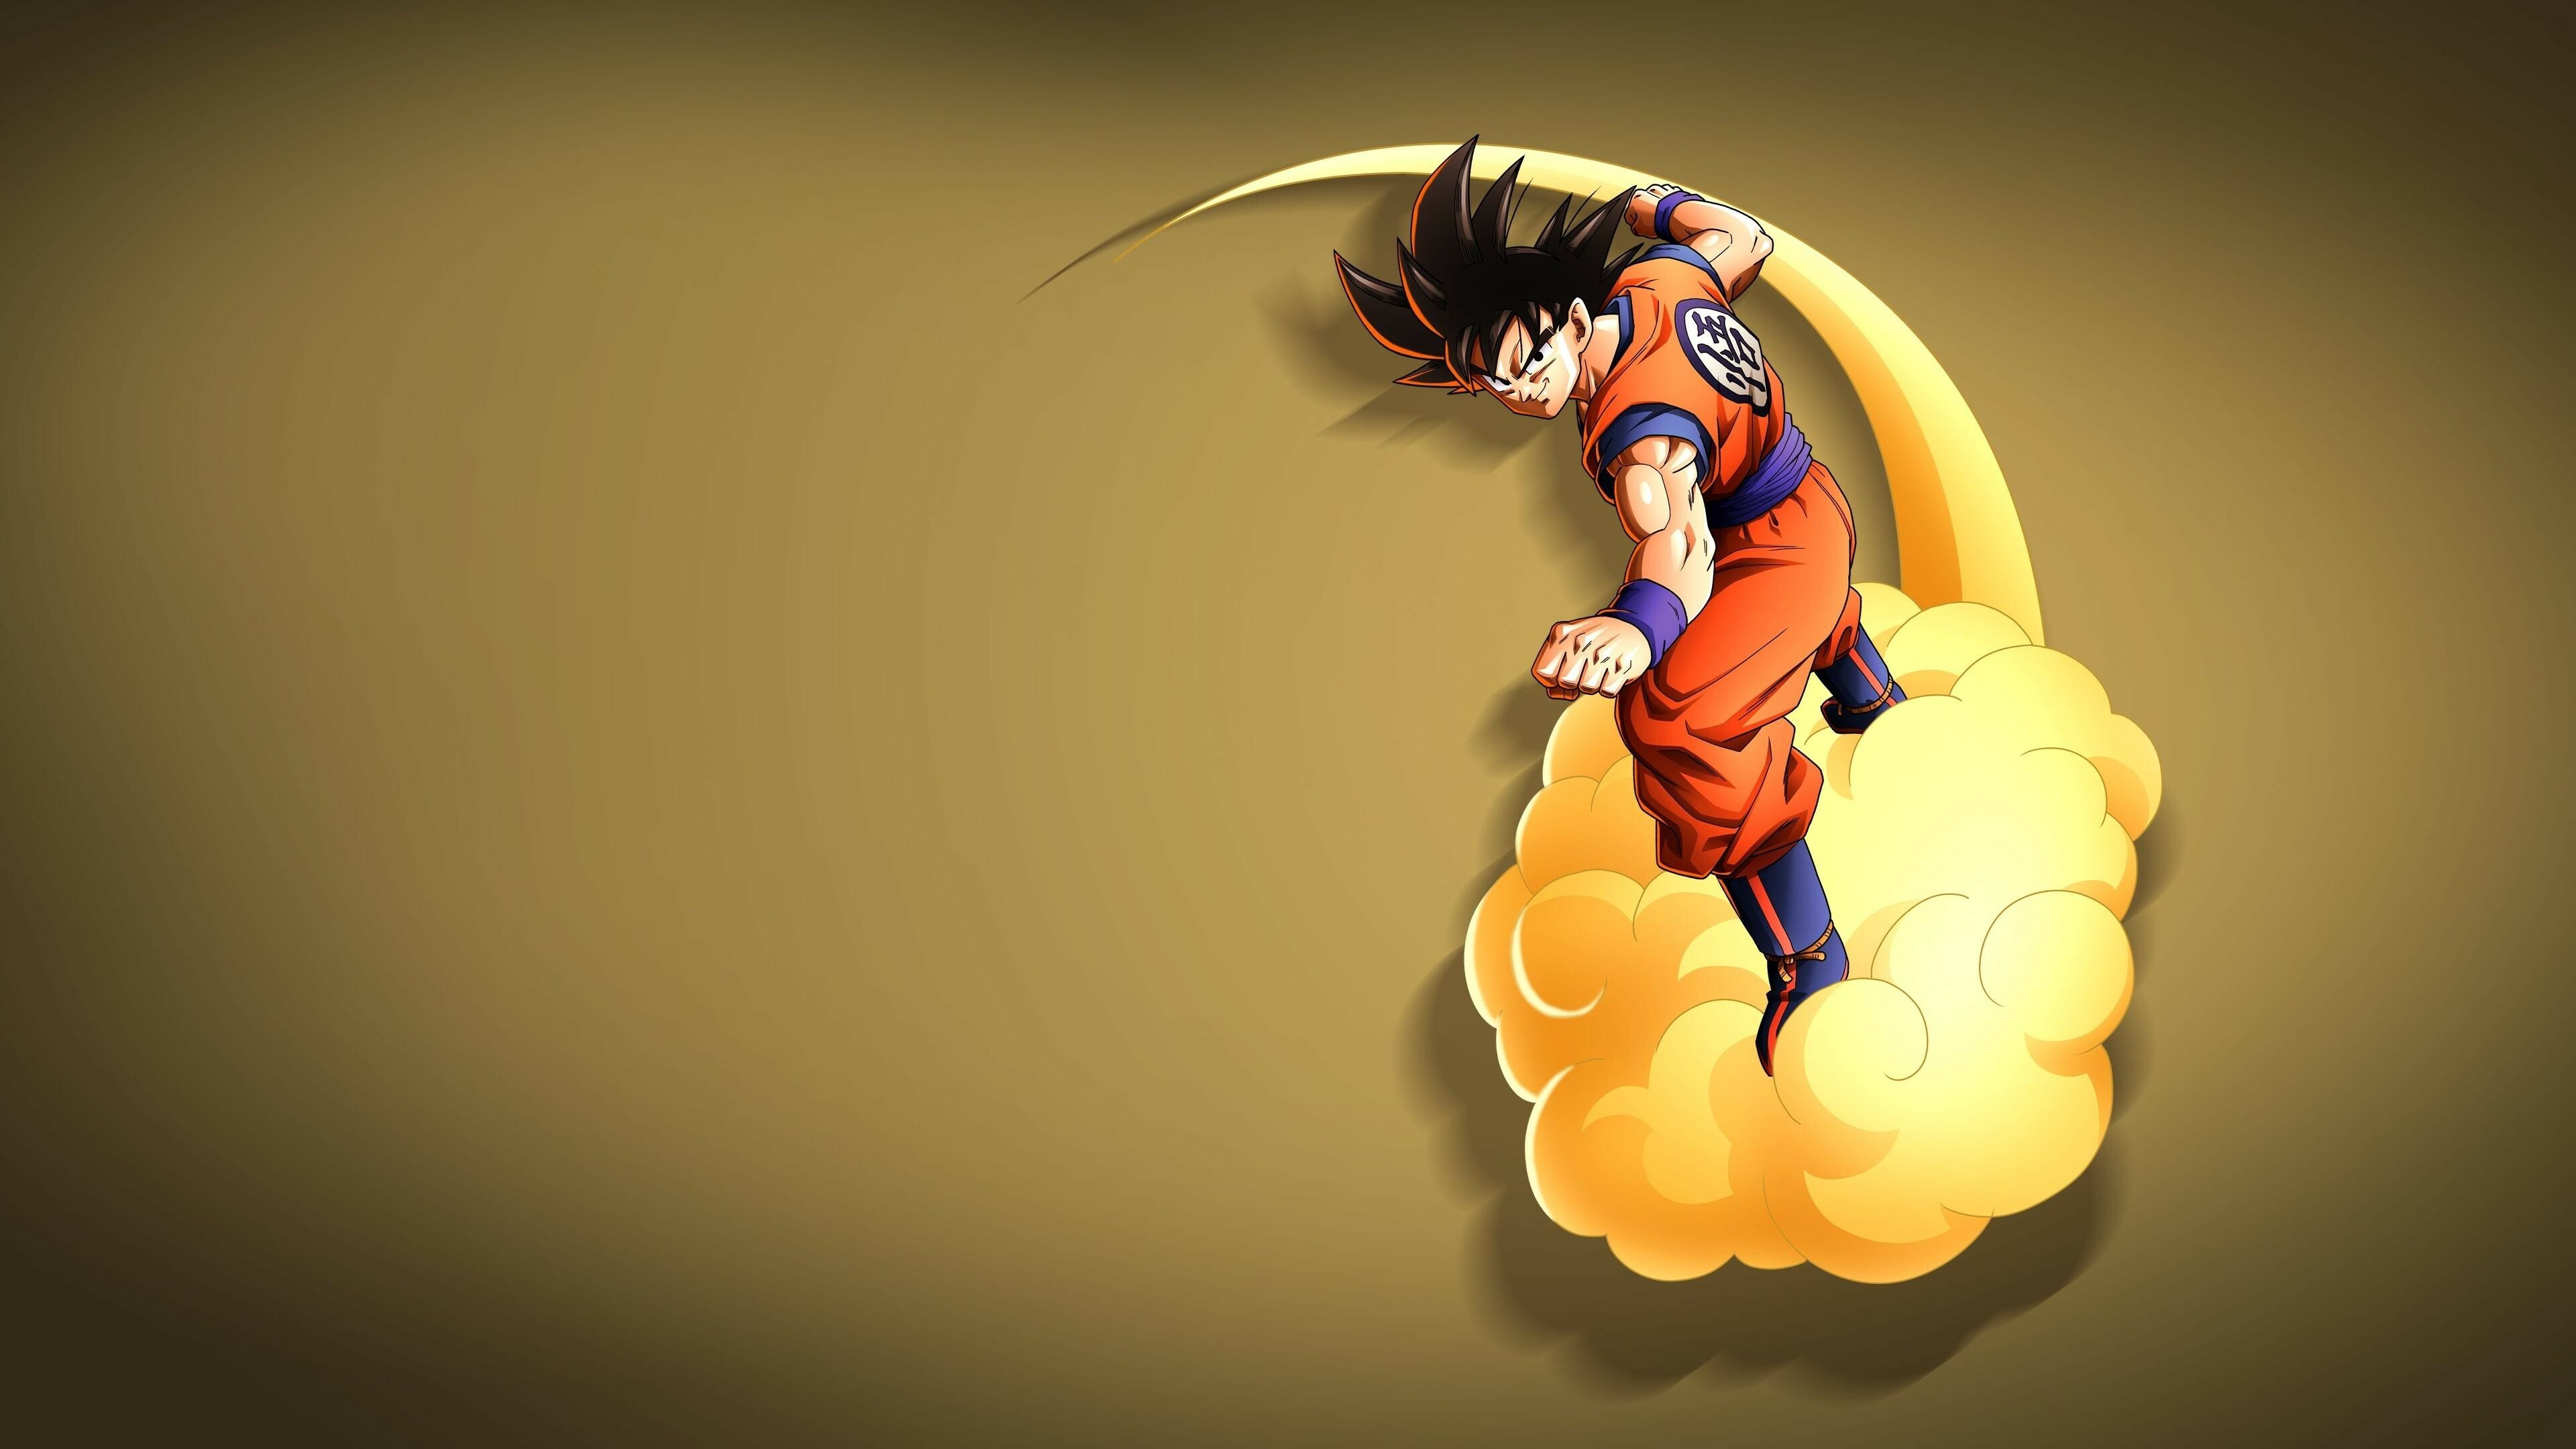 Dragon Ball Z Wallpapers (30+ images inside)